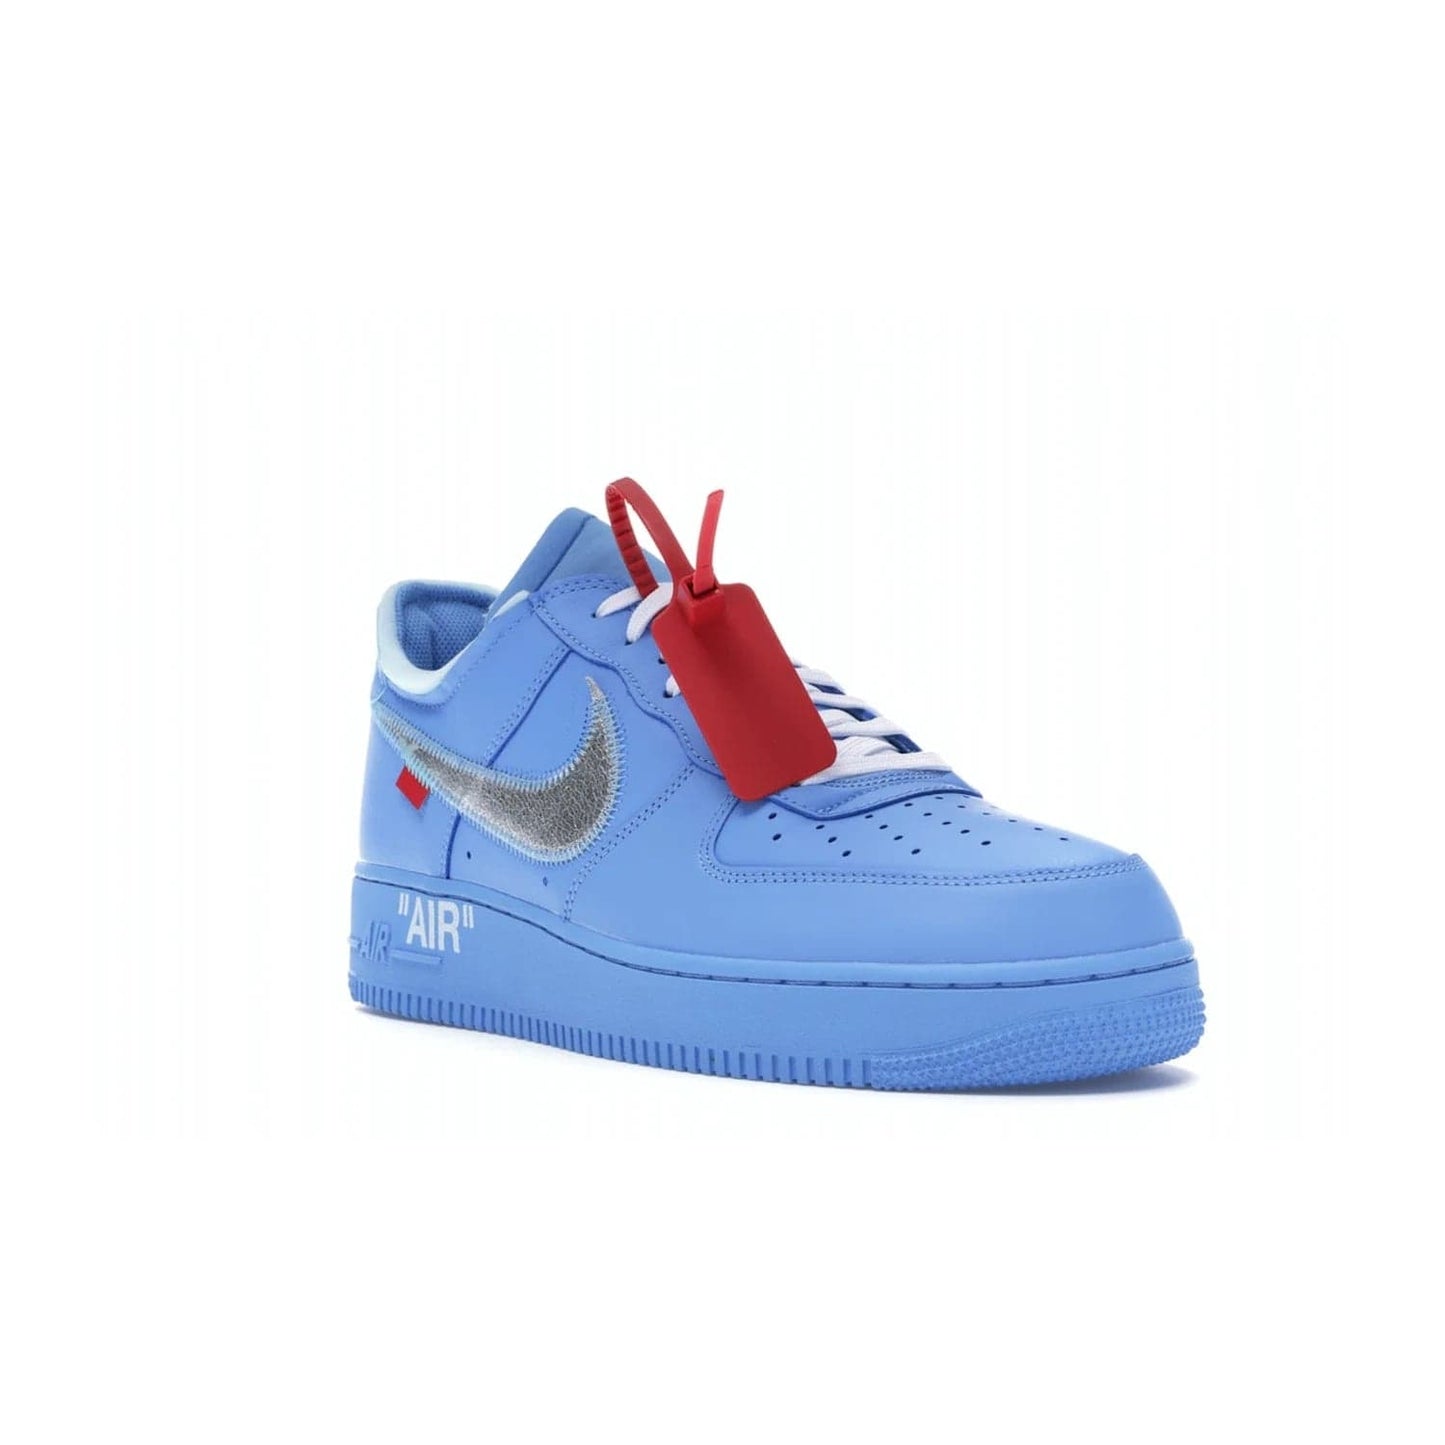 Nike Air Force 1 Low Off-White MCA University Blue - Image 6 - Only at www.BallersClubKickz.com - Virgil Abloh's Air Force 1 Low Off-White MCA University Blue: Features University Blue leather and midsole, reflective silver Nike Swoosh, red zip tie, white laces, and iconic Off-White™ branding. A must-have for any Virgil Abloh enthusiast.